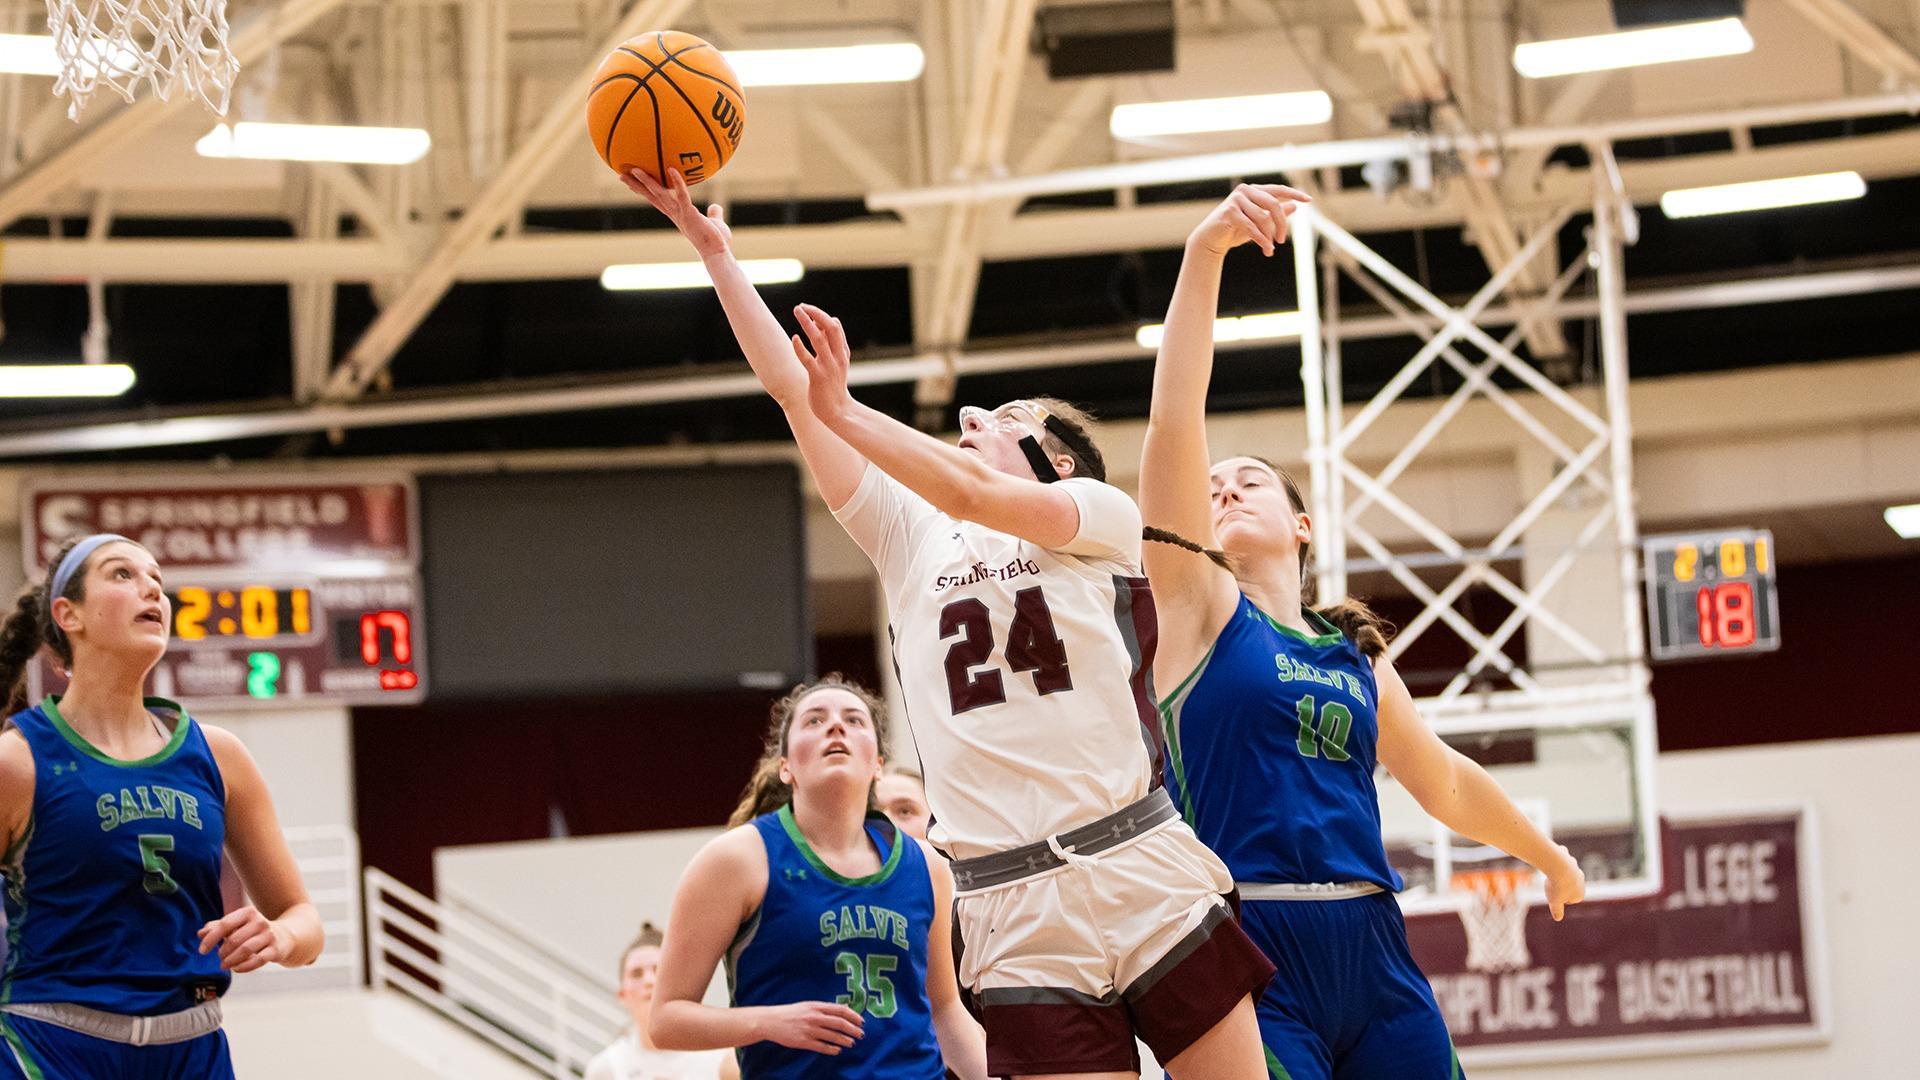 Claire Finney drives to hoop with Sofia Neary, Olivia Martin, Deanna Linscott in her path. (Photo by Dominic Ramalho)